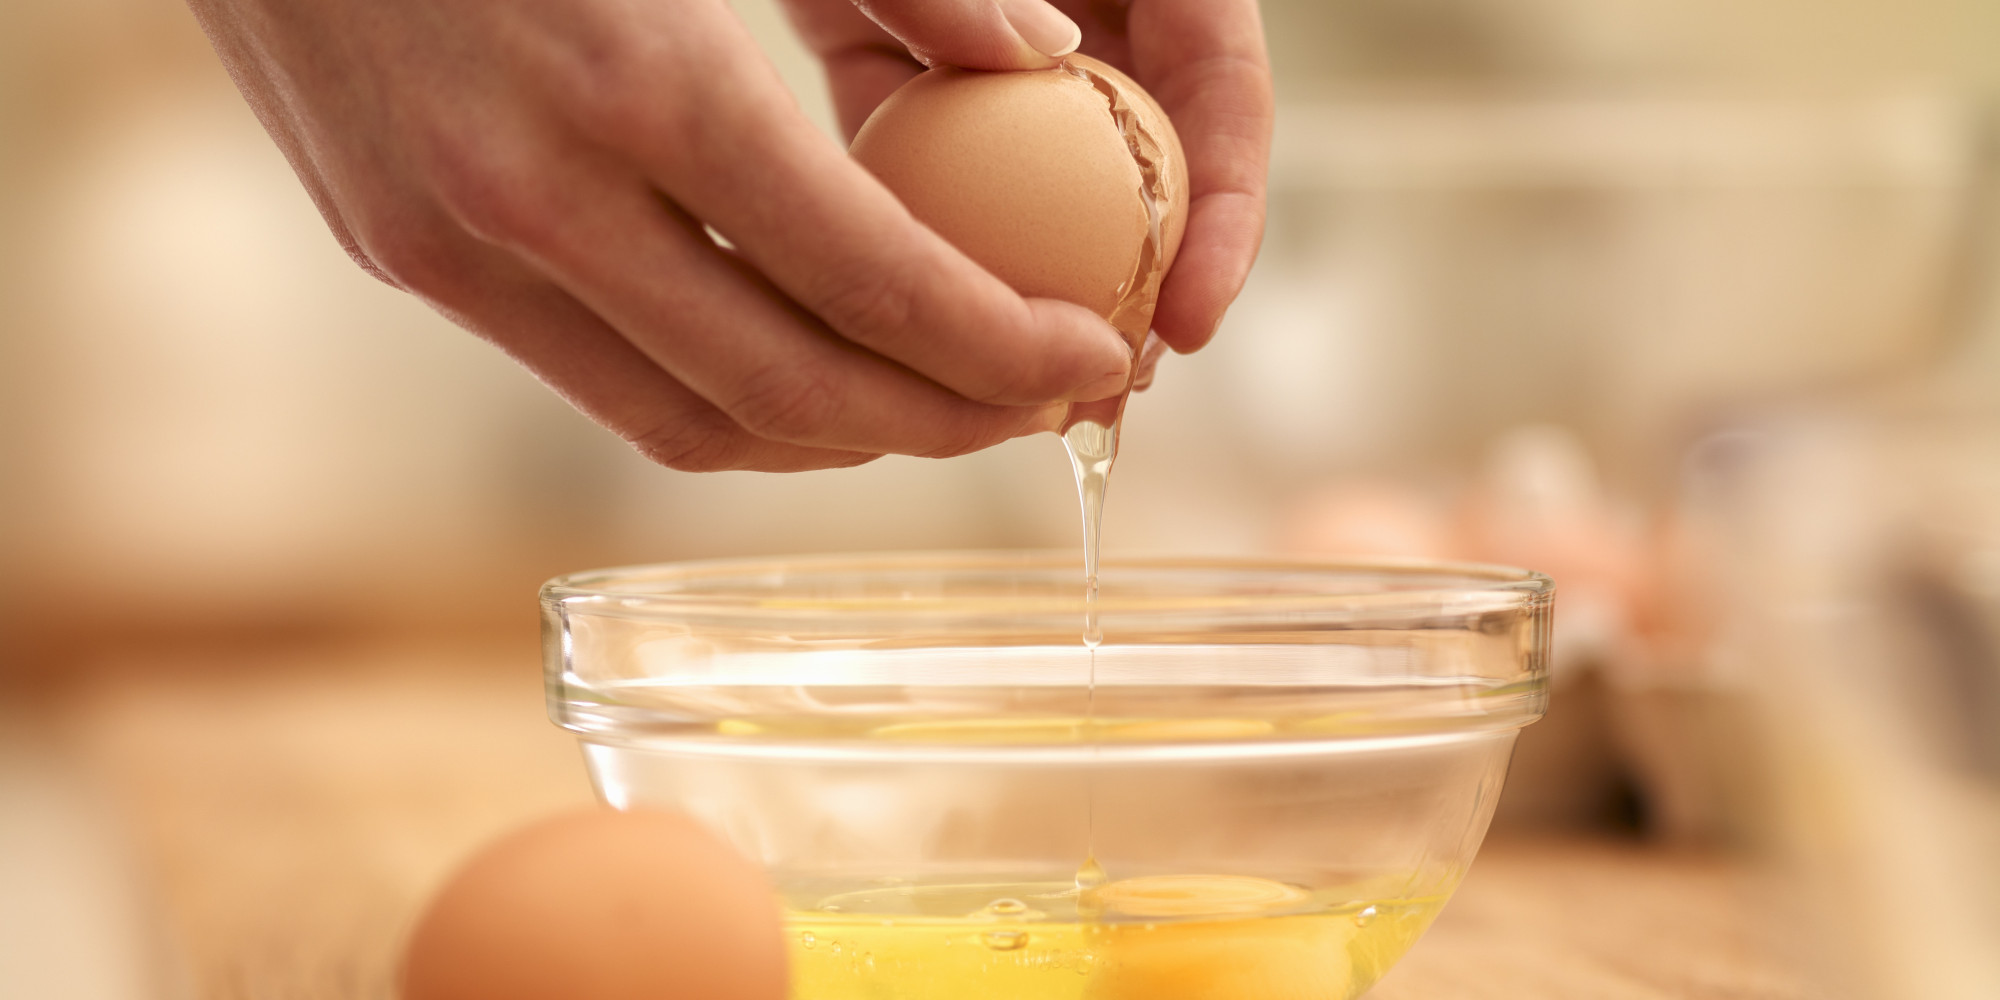 Every Way You Could Possibly Need To Crack An Egg (VIDEOS) | HuffPost